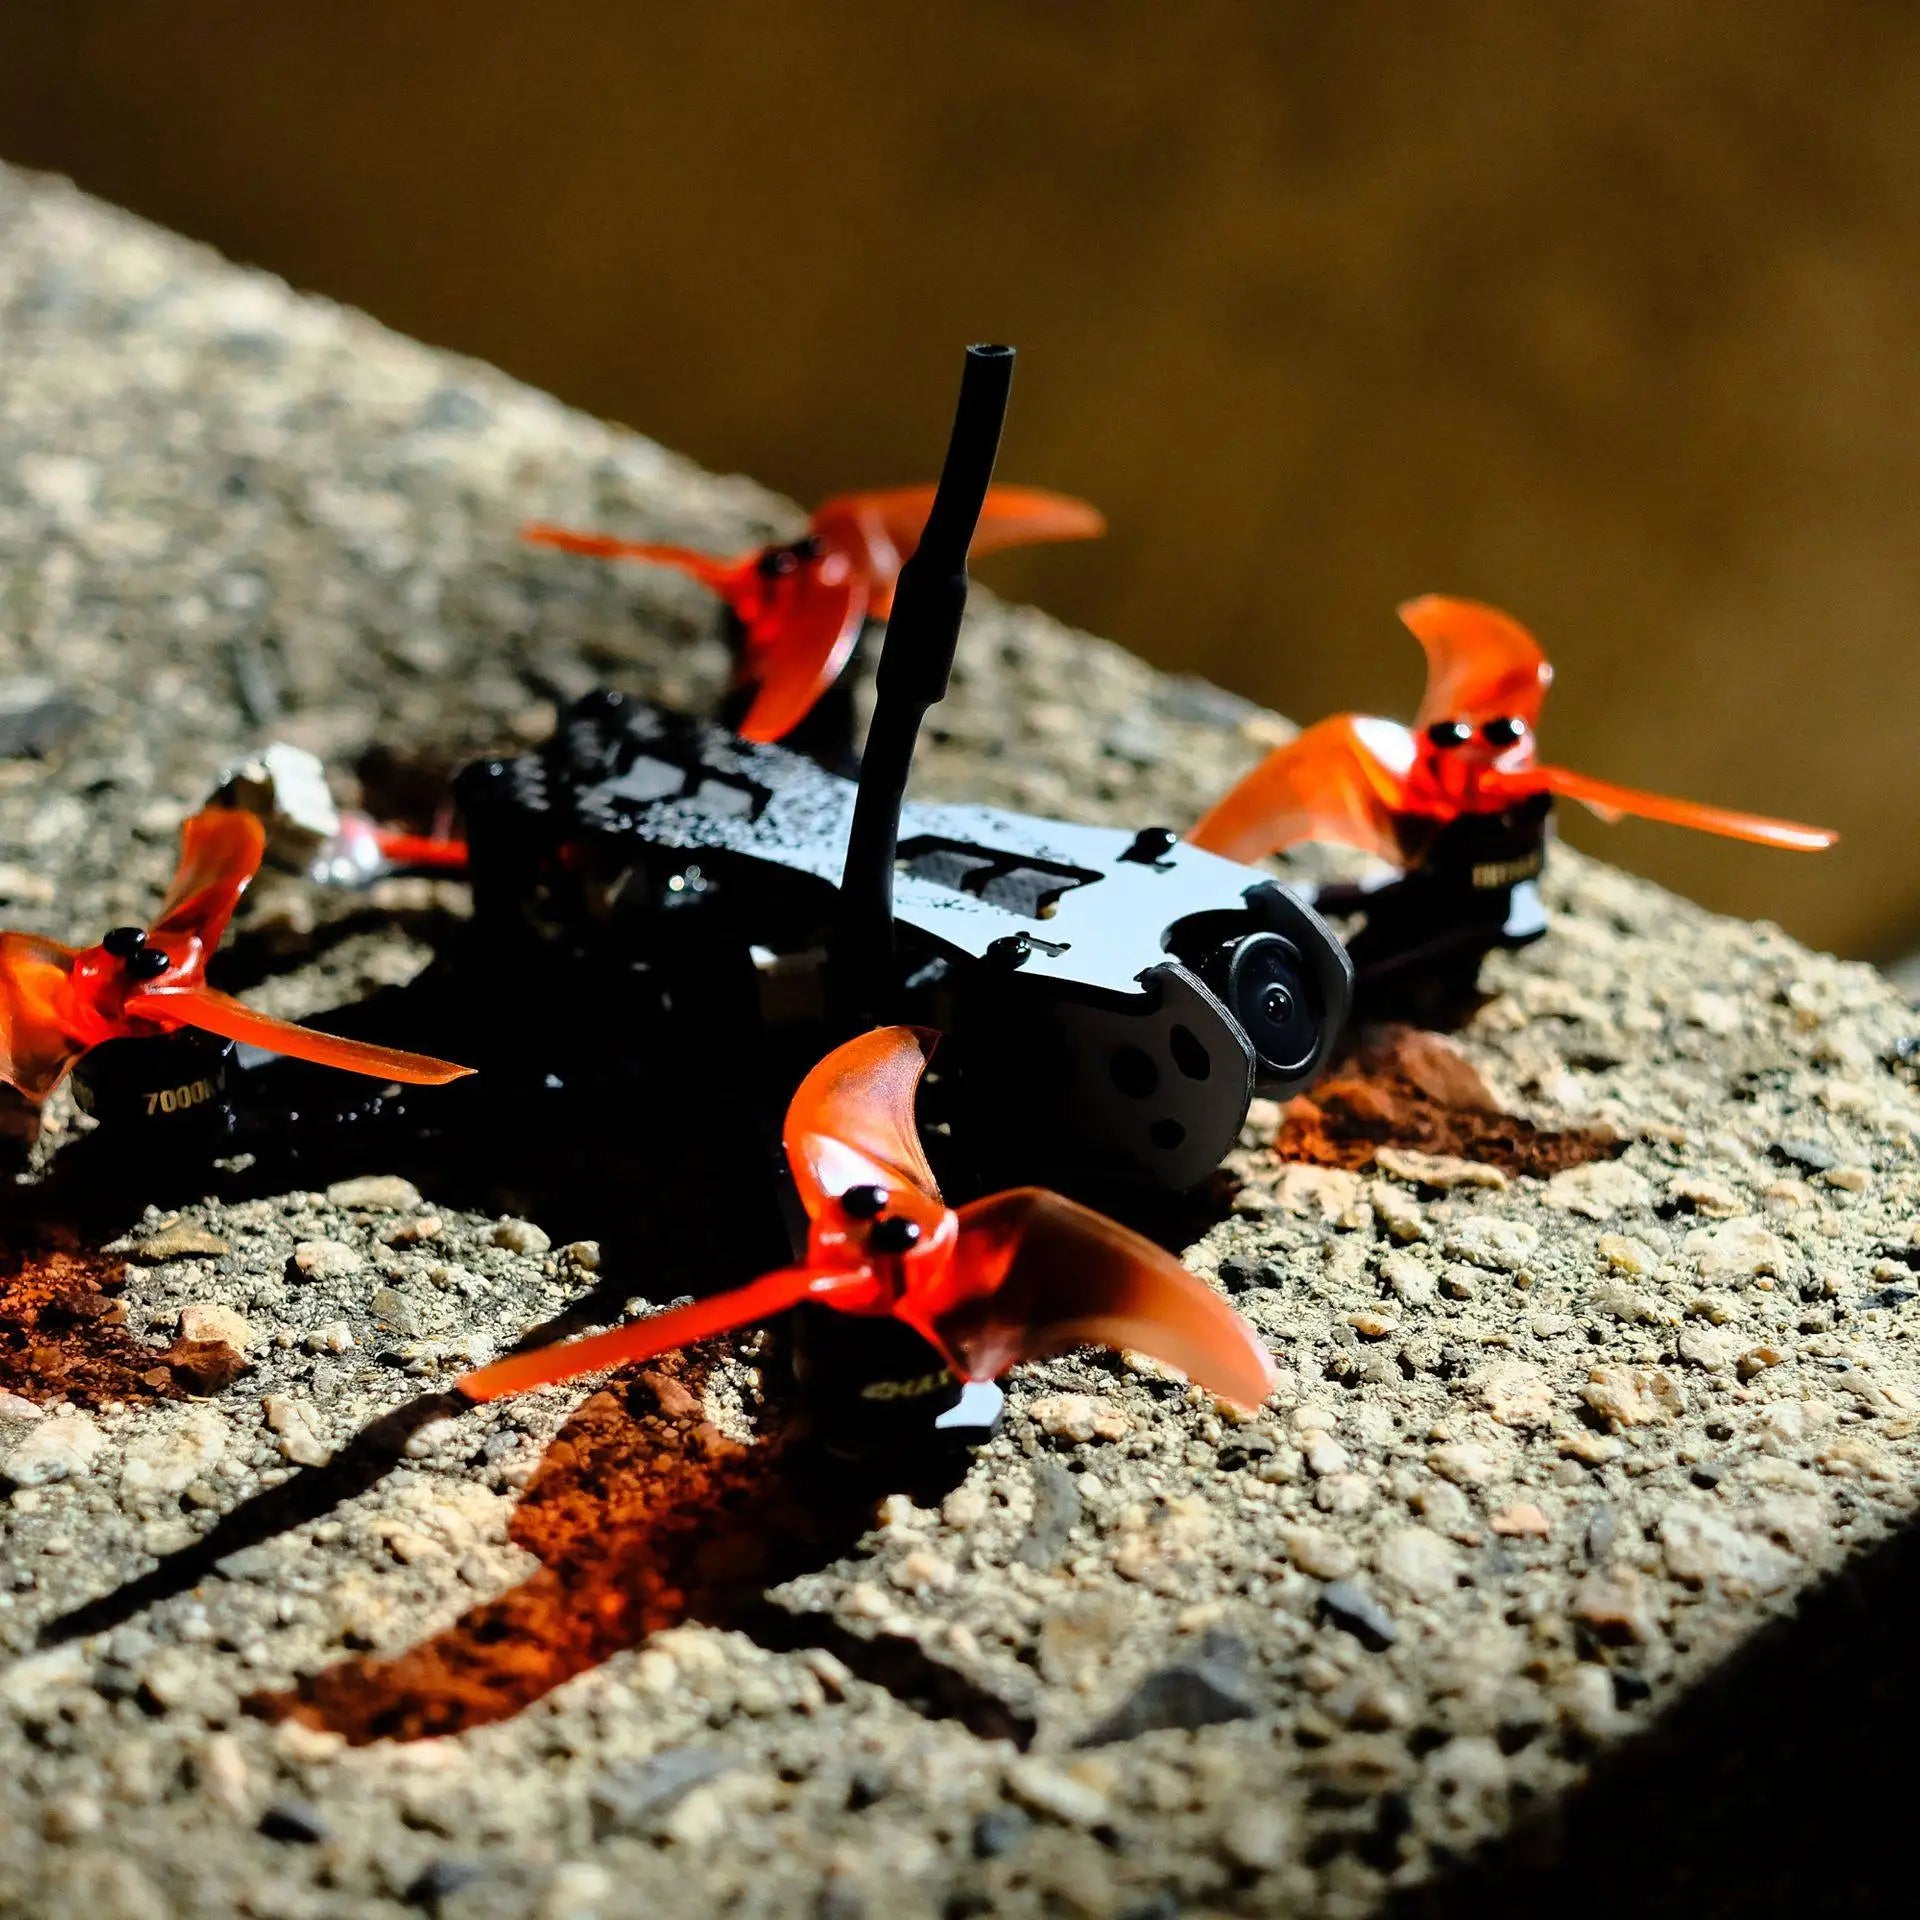 EMAX Tinyhawk Freestyle, motors have a Kv rating of 7000kv, allowing for rapid acceleration